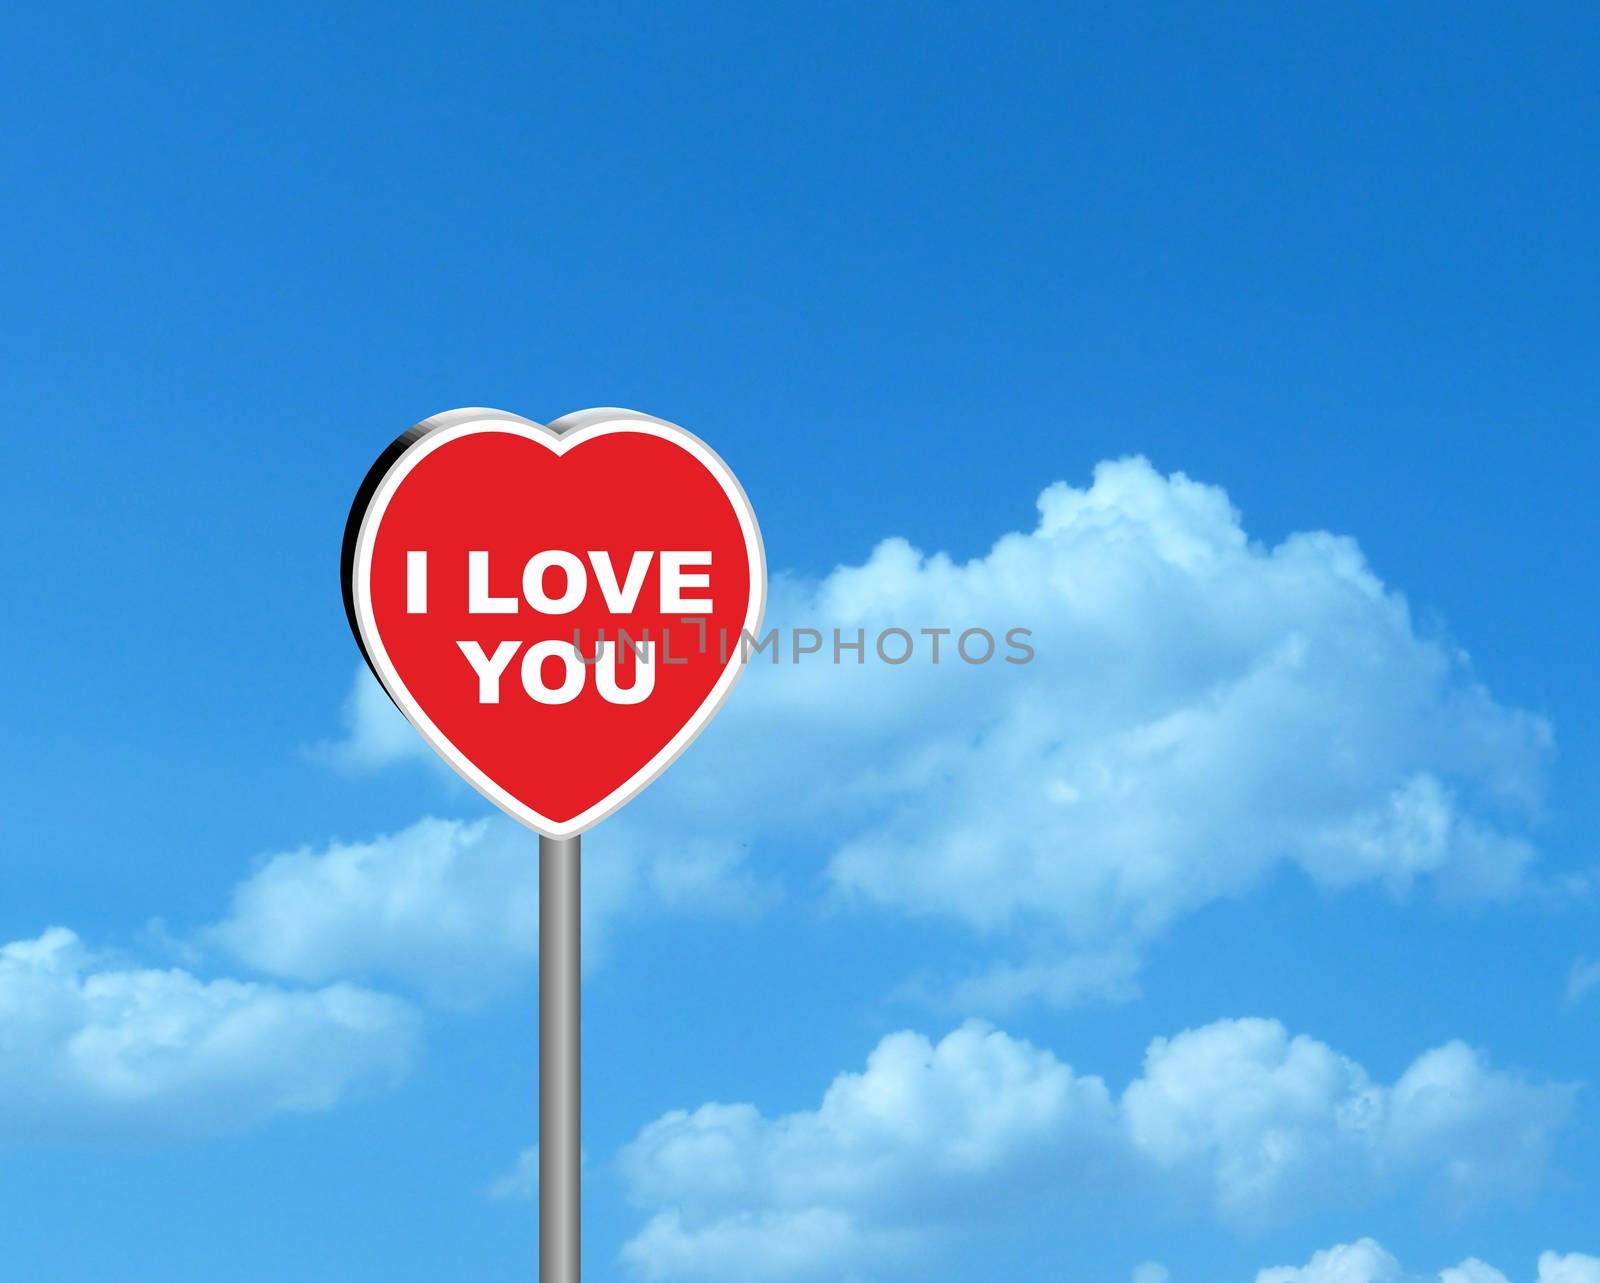 Declaration of love on a road sign in the shape of heart